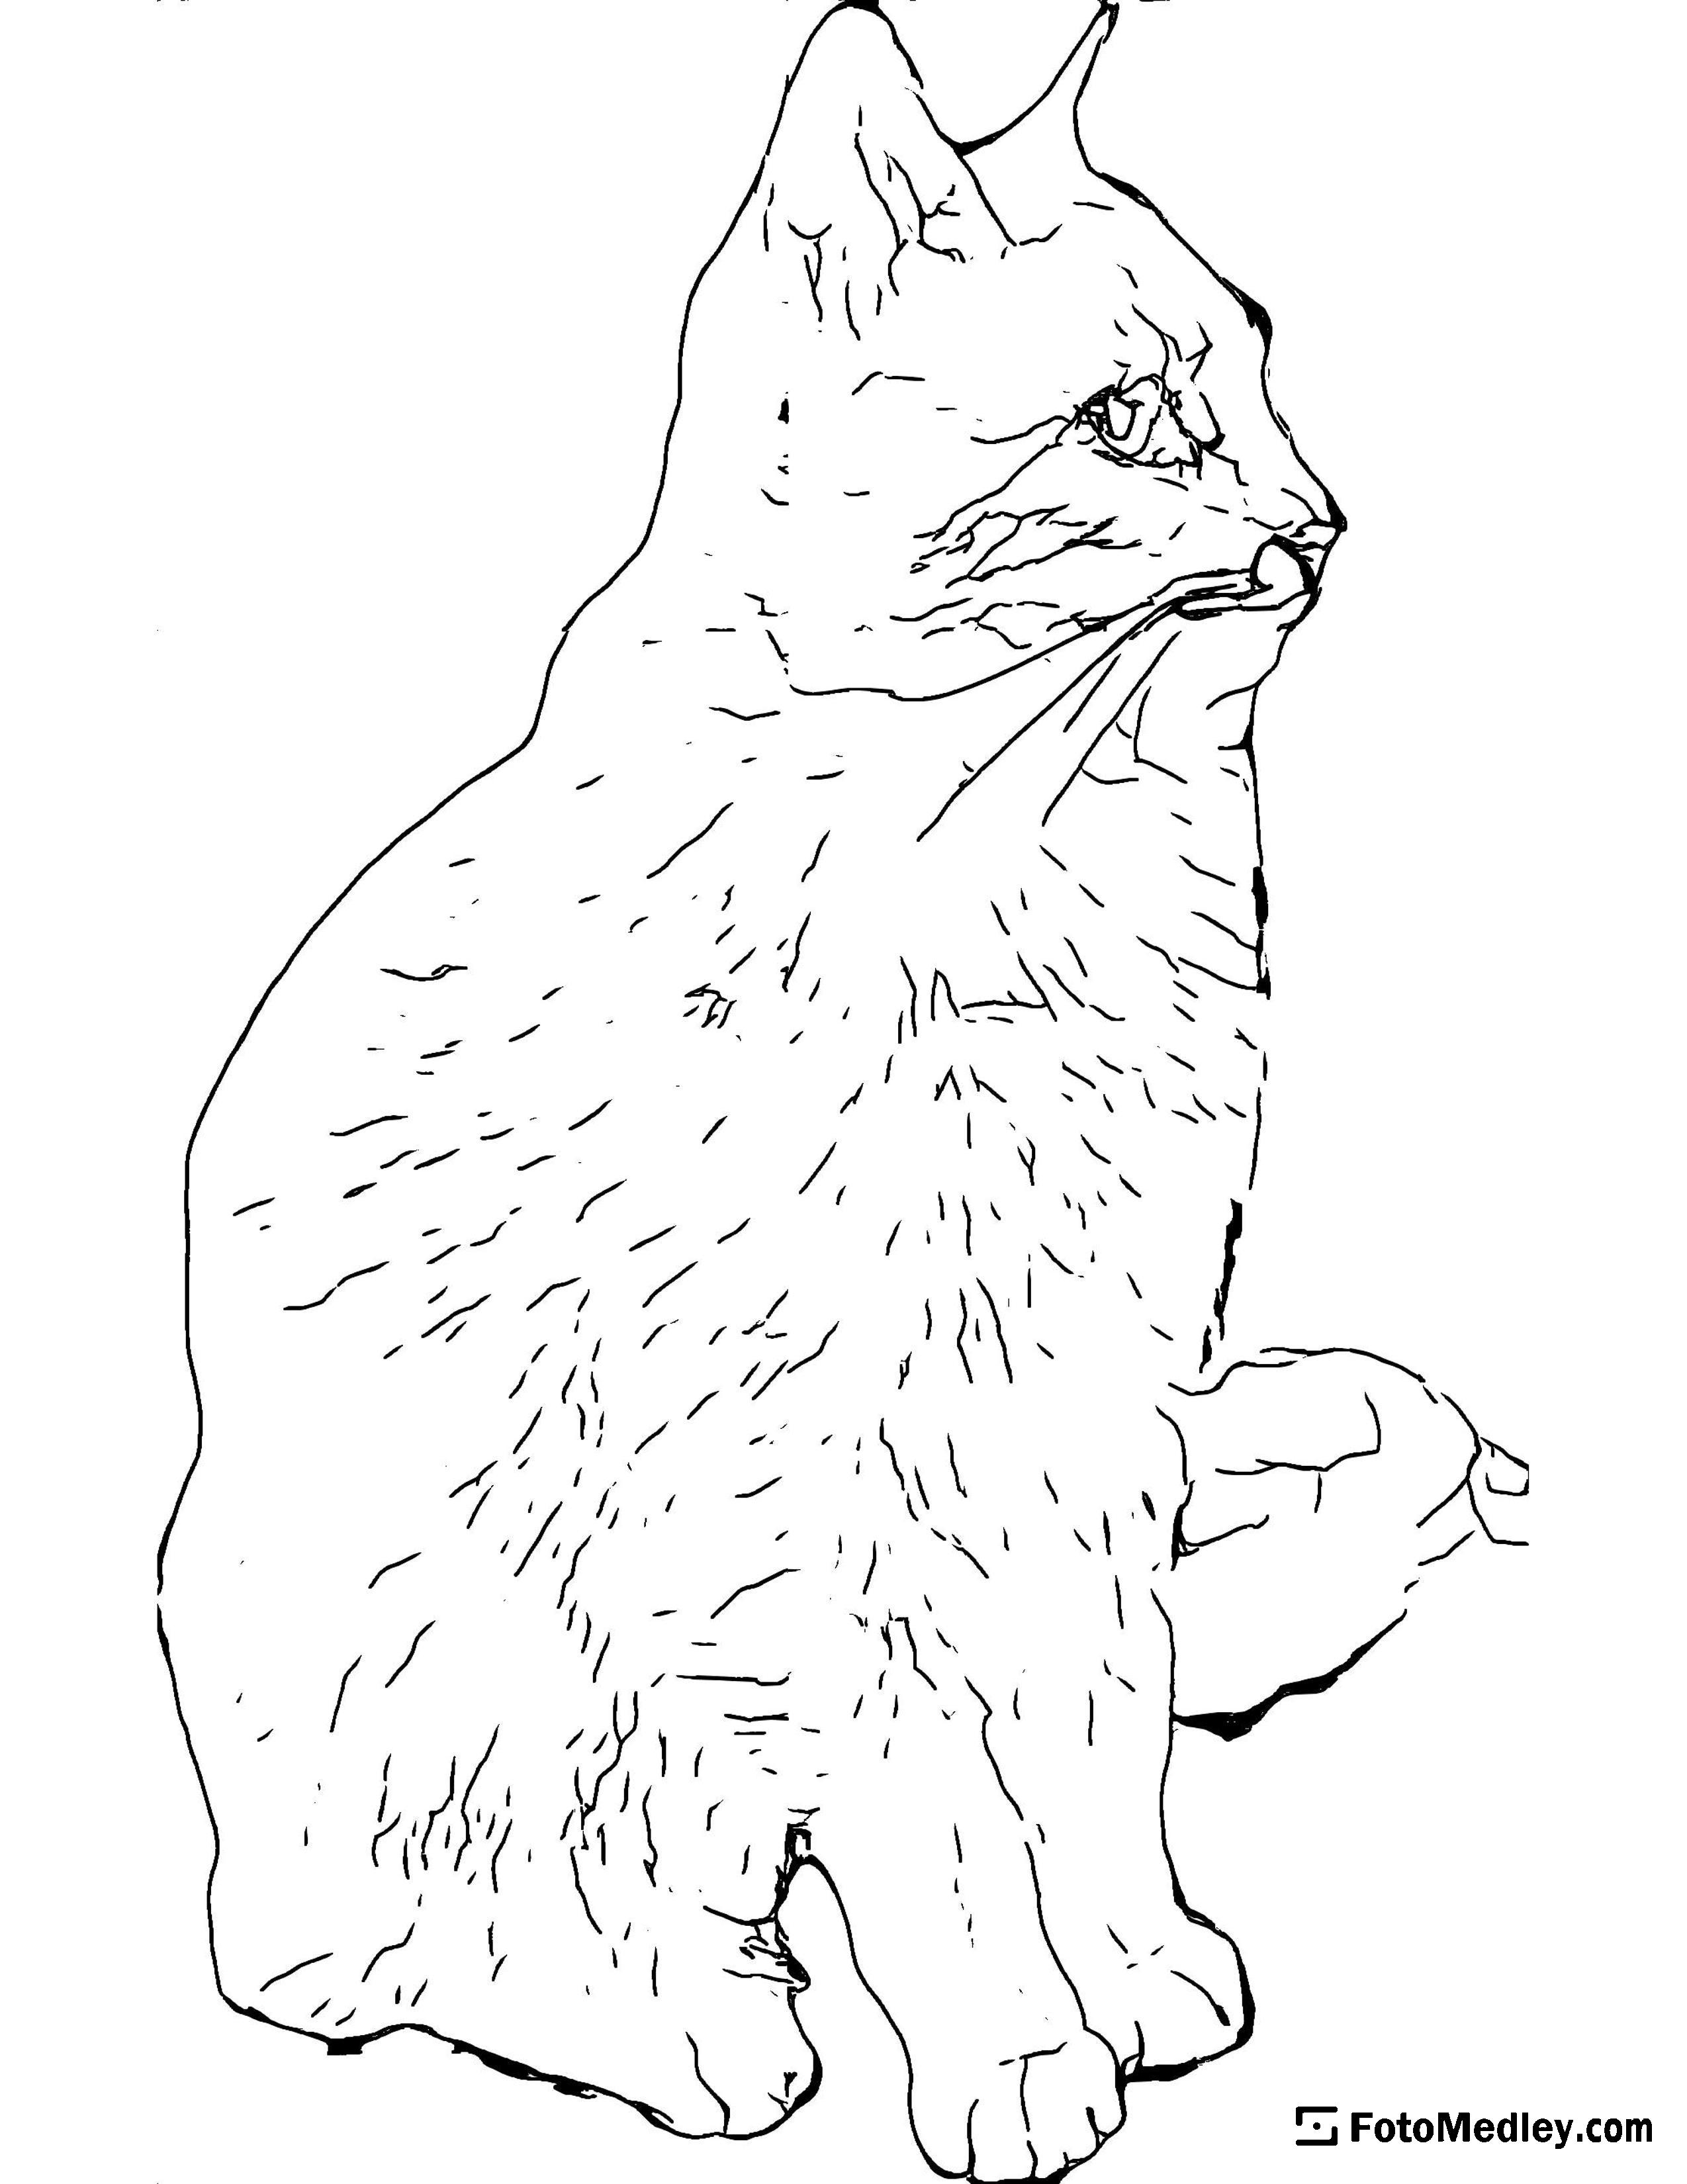 A coloring page of a cat sitting calmly, posing for a picture.